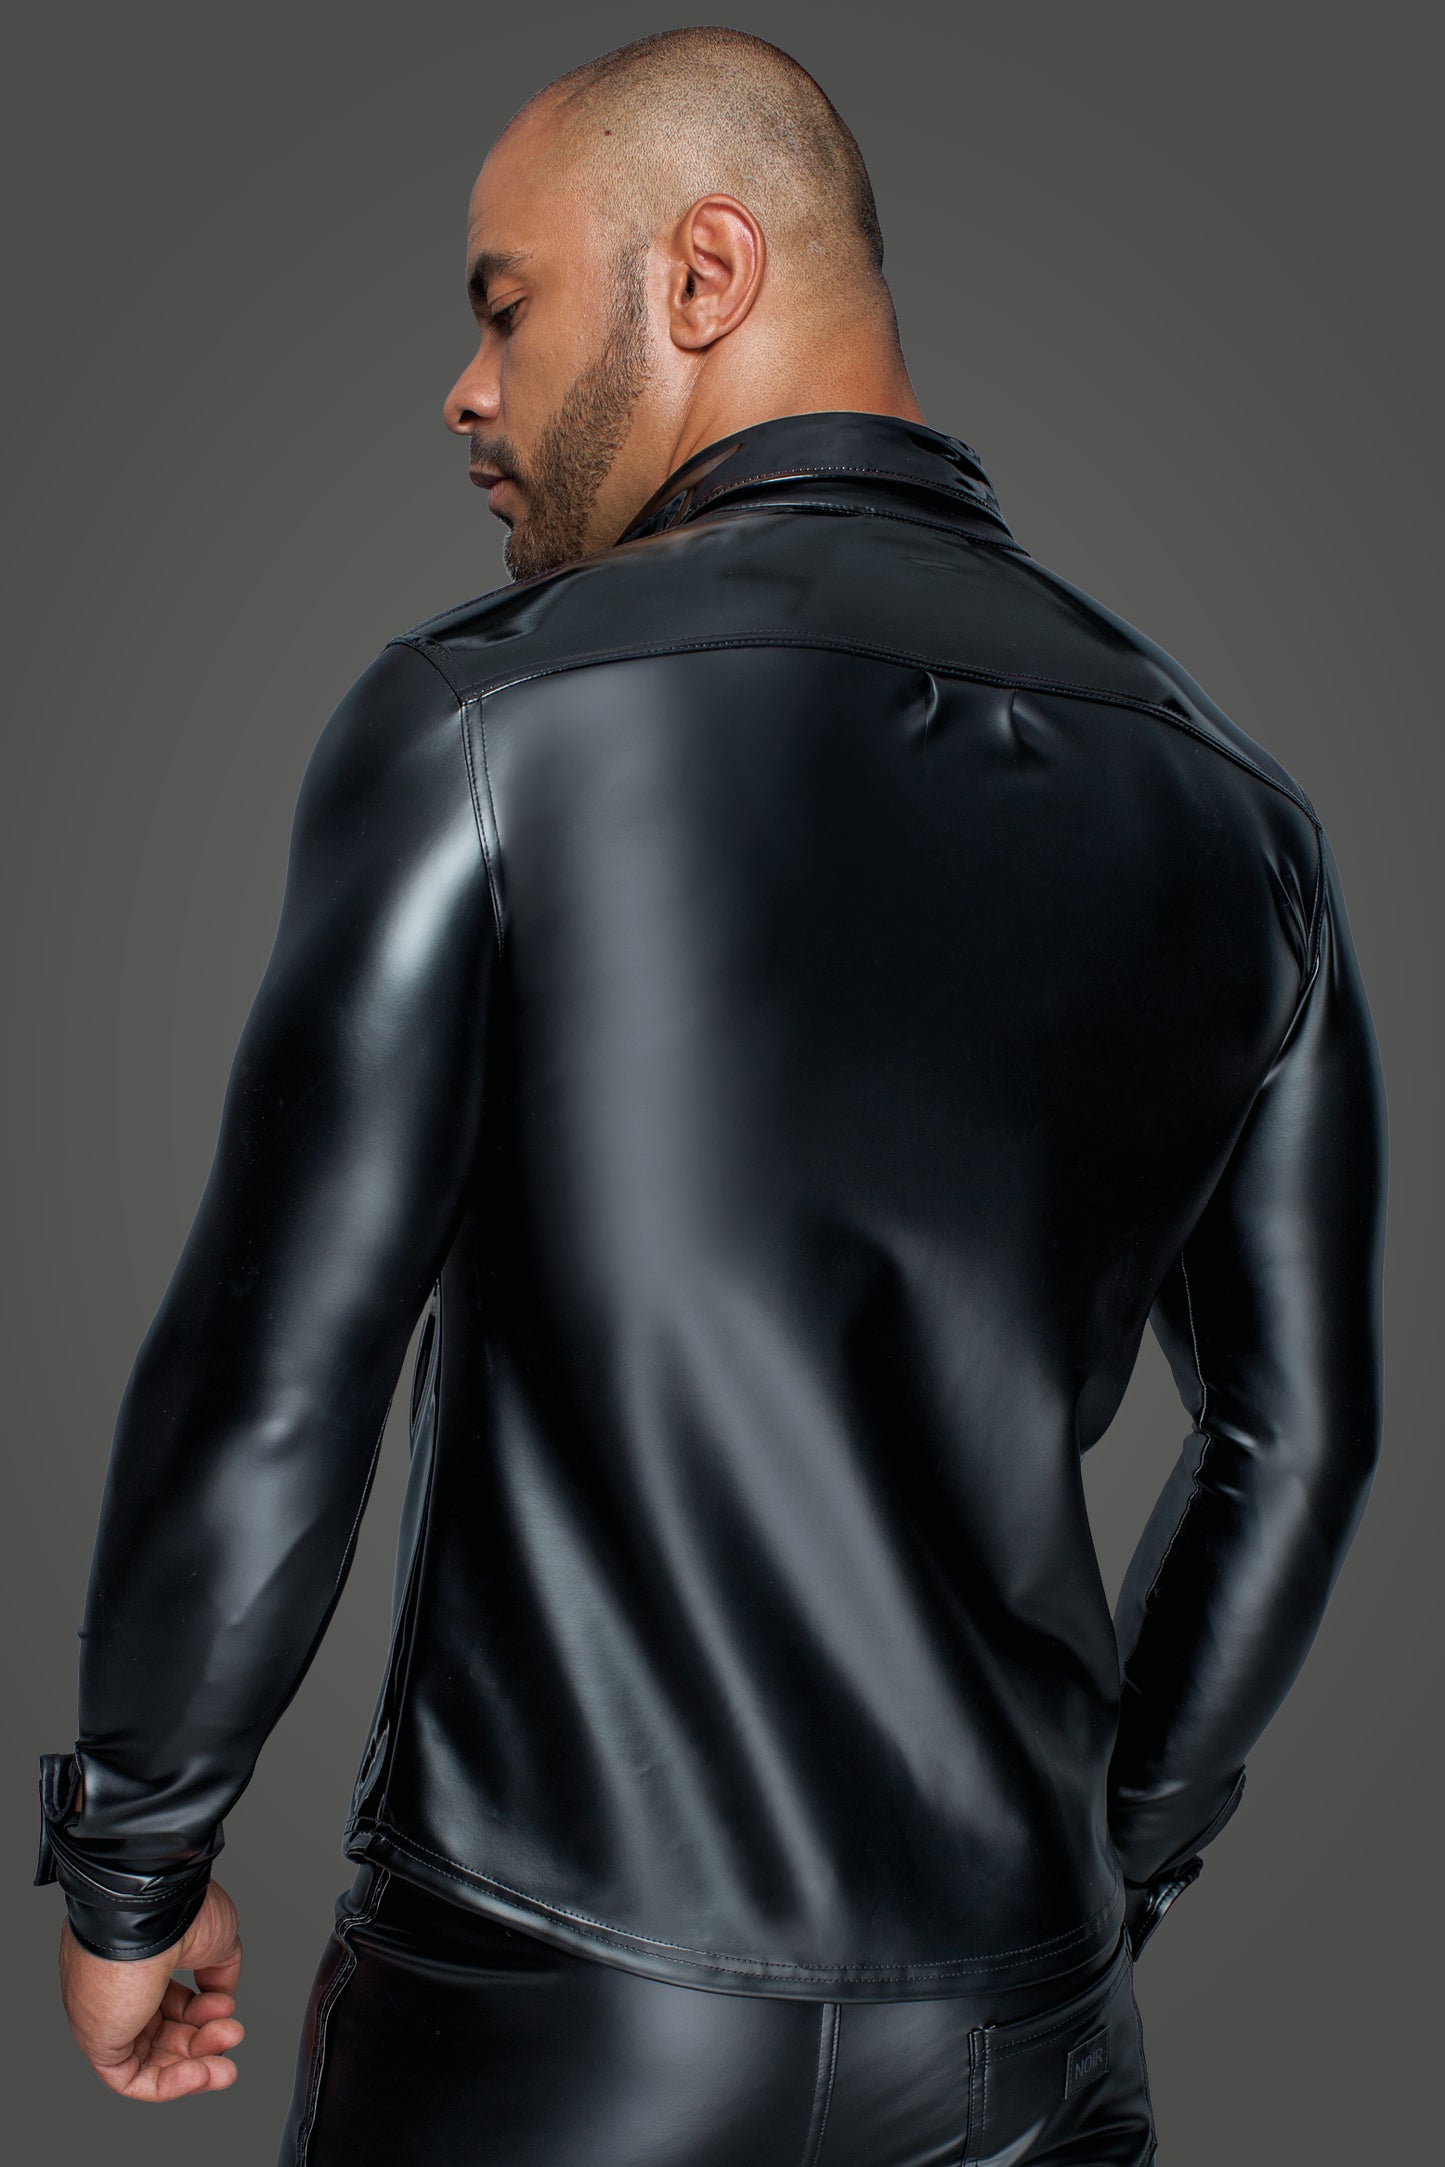 Model showing the back of the Long Sleeved Power Wetlook & PVC Shirt.